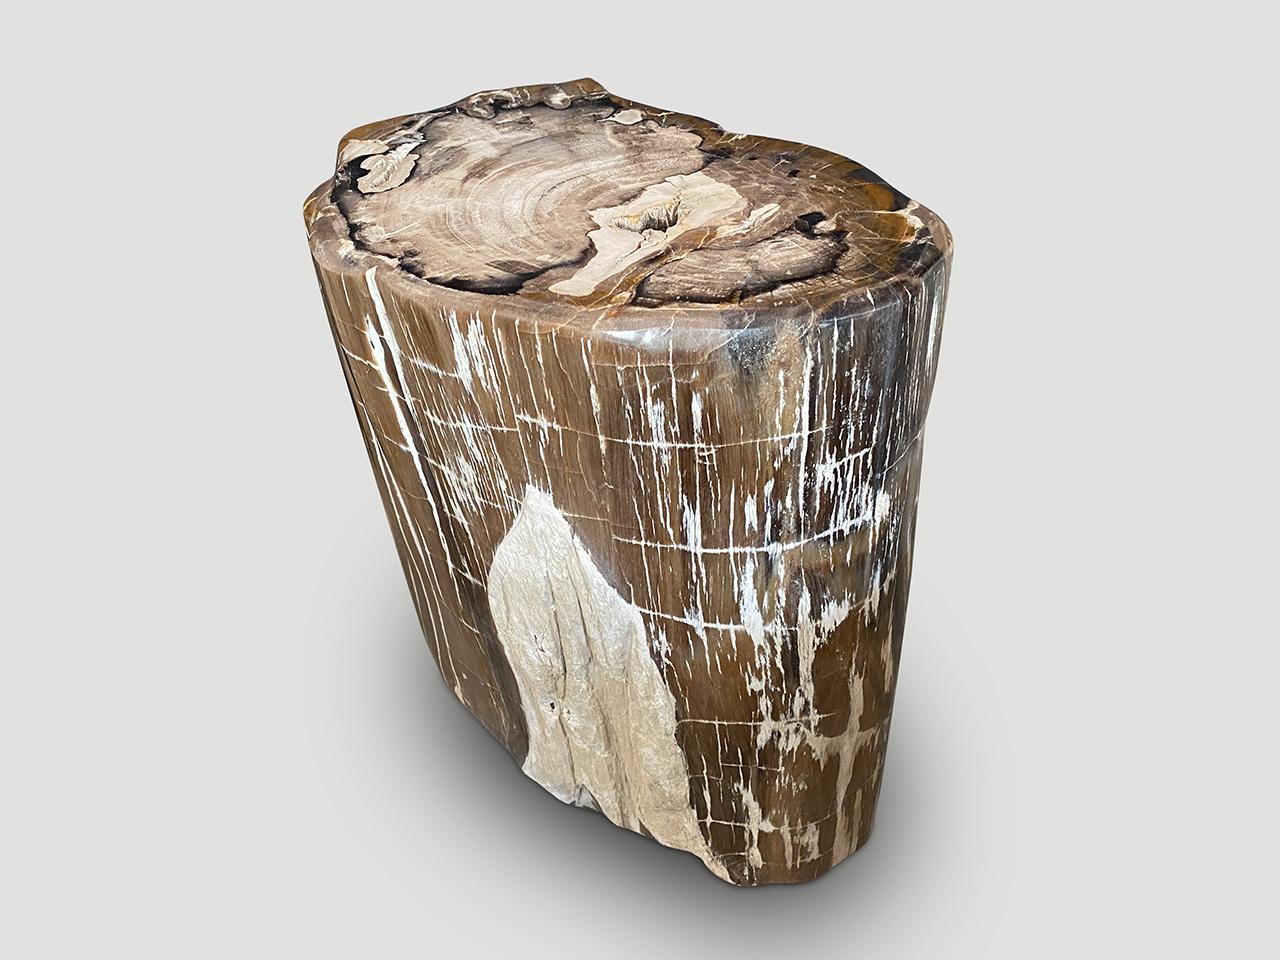 Beautiful tones and textures in this ancient petrified wood side table. Rare. It’s fascinating how Mother Nature produces these exquisite 40 million year old petrified teak logs with such contrasting colors and natural patterns throughout. Modern